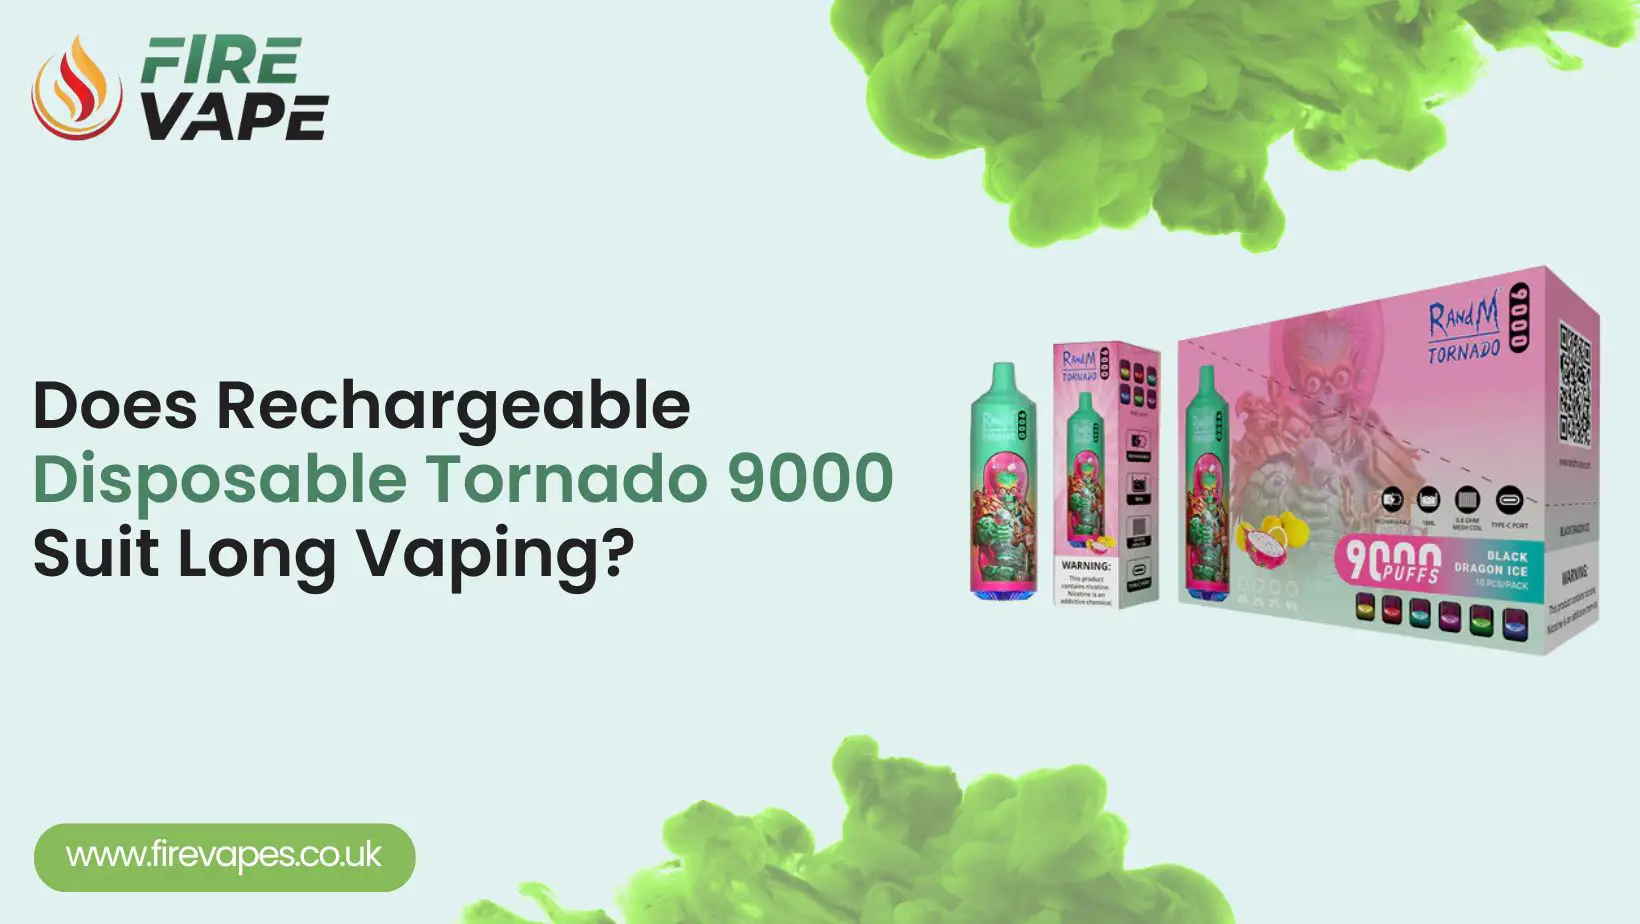 Does rechargeable disposable Tornado 9000 suit long vaping